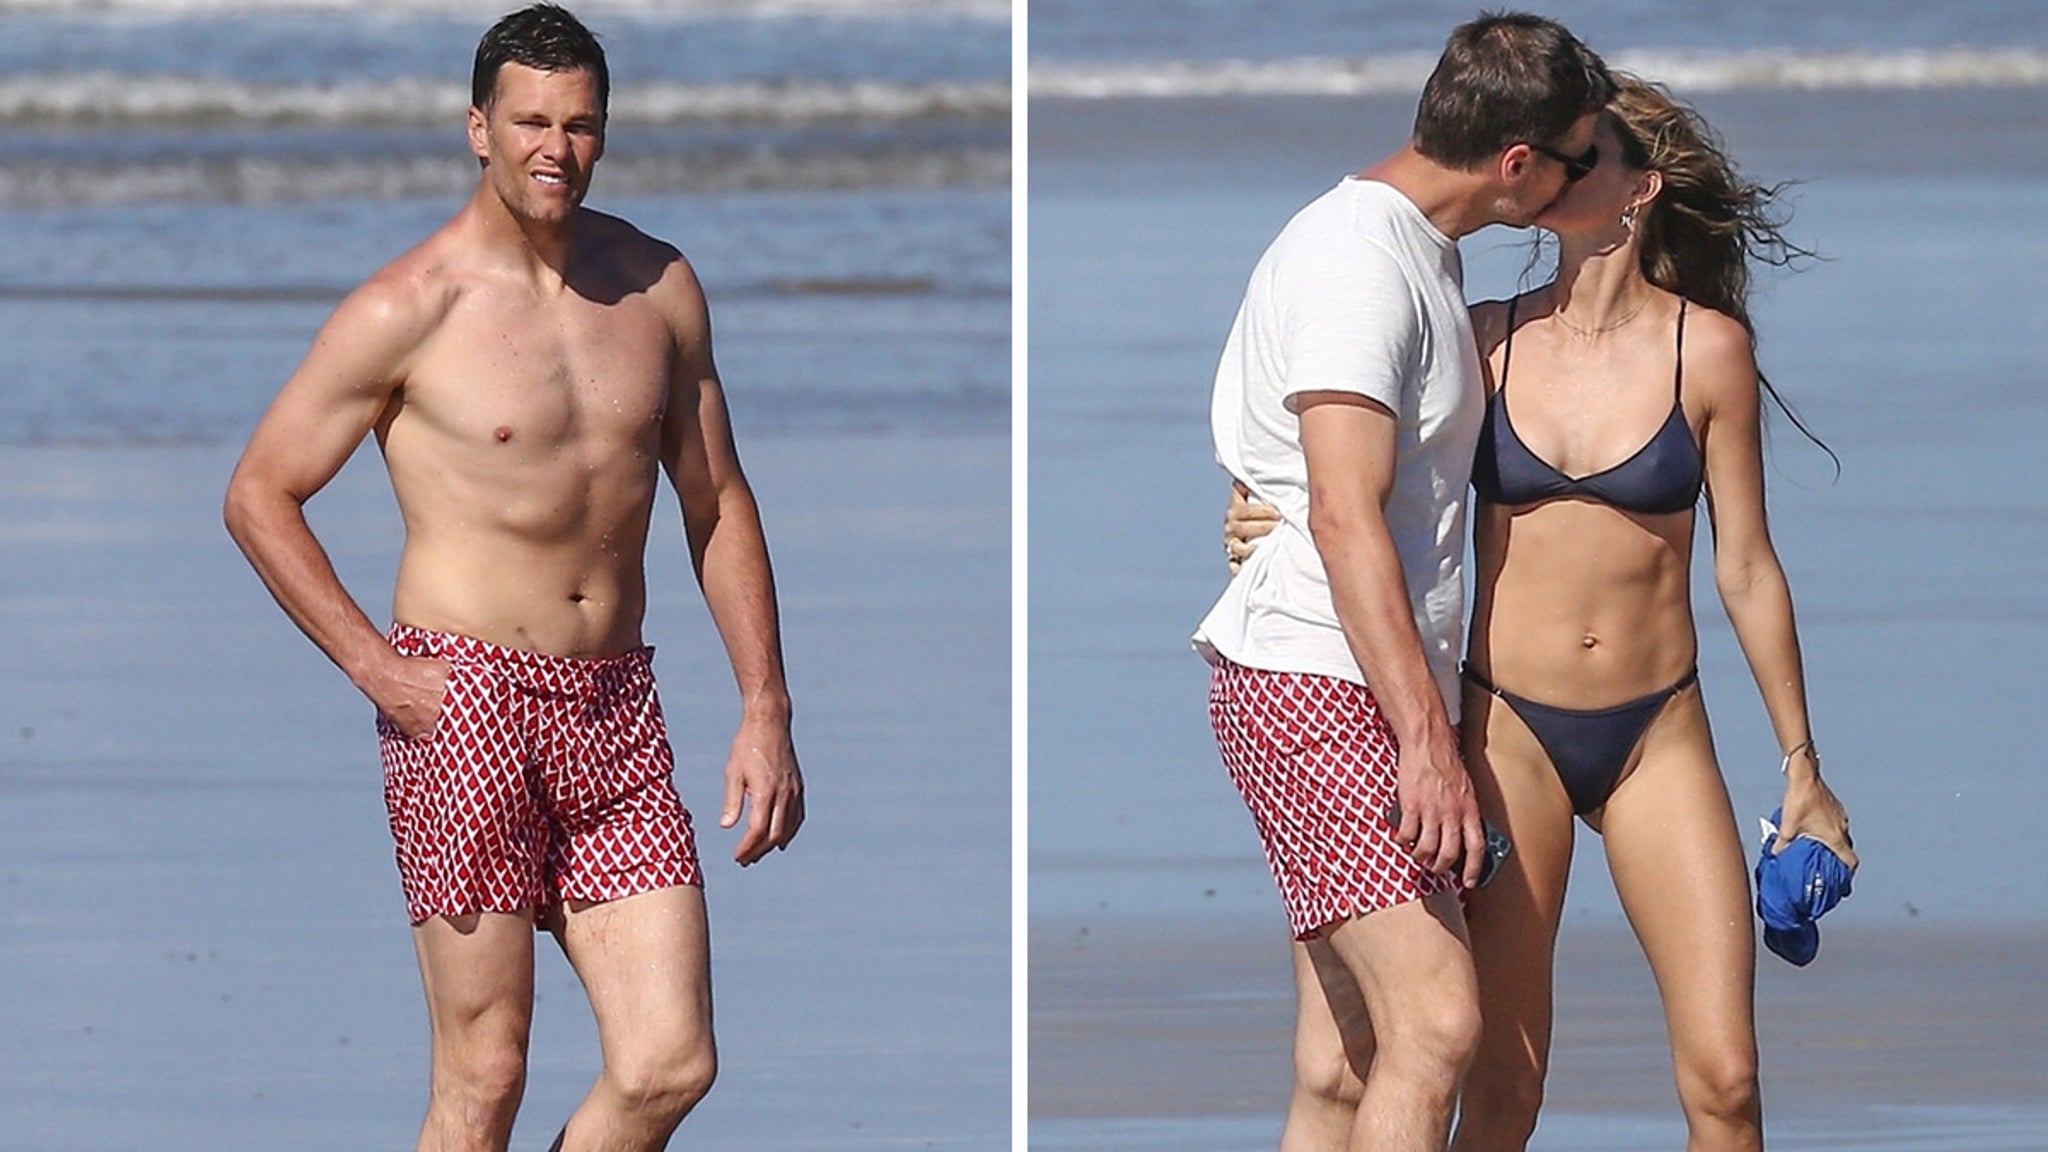 Tom Brady and Gisele Bundchen Make Out On Beach in Costa Rica.